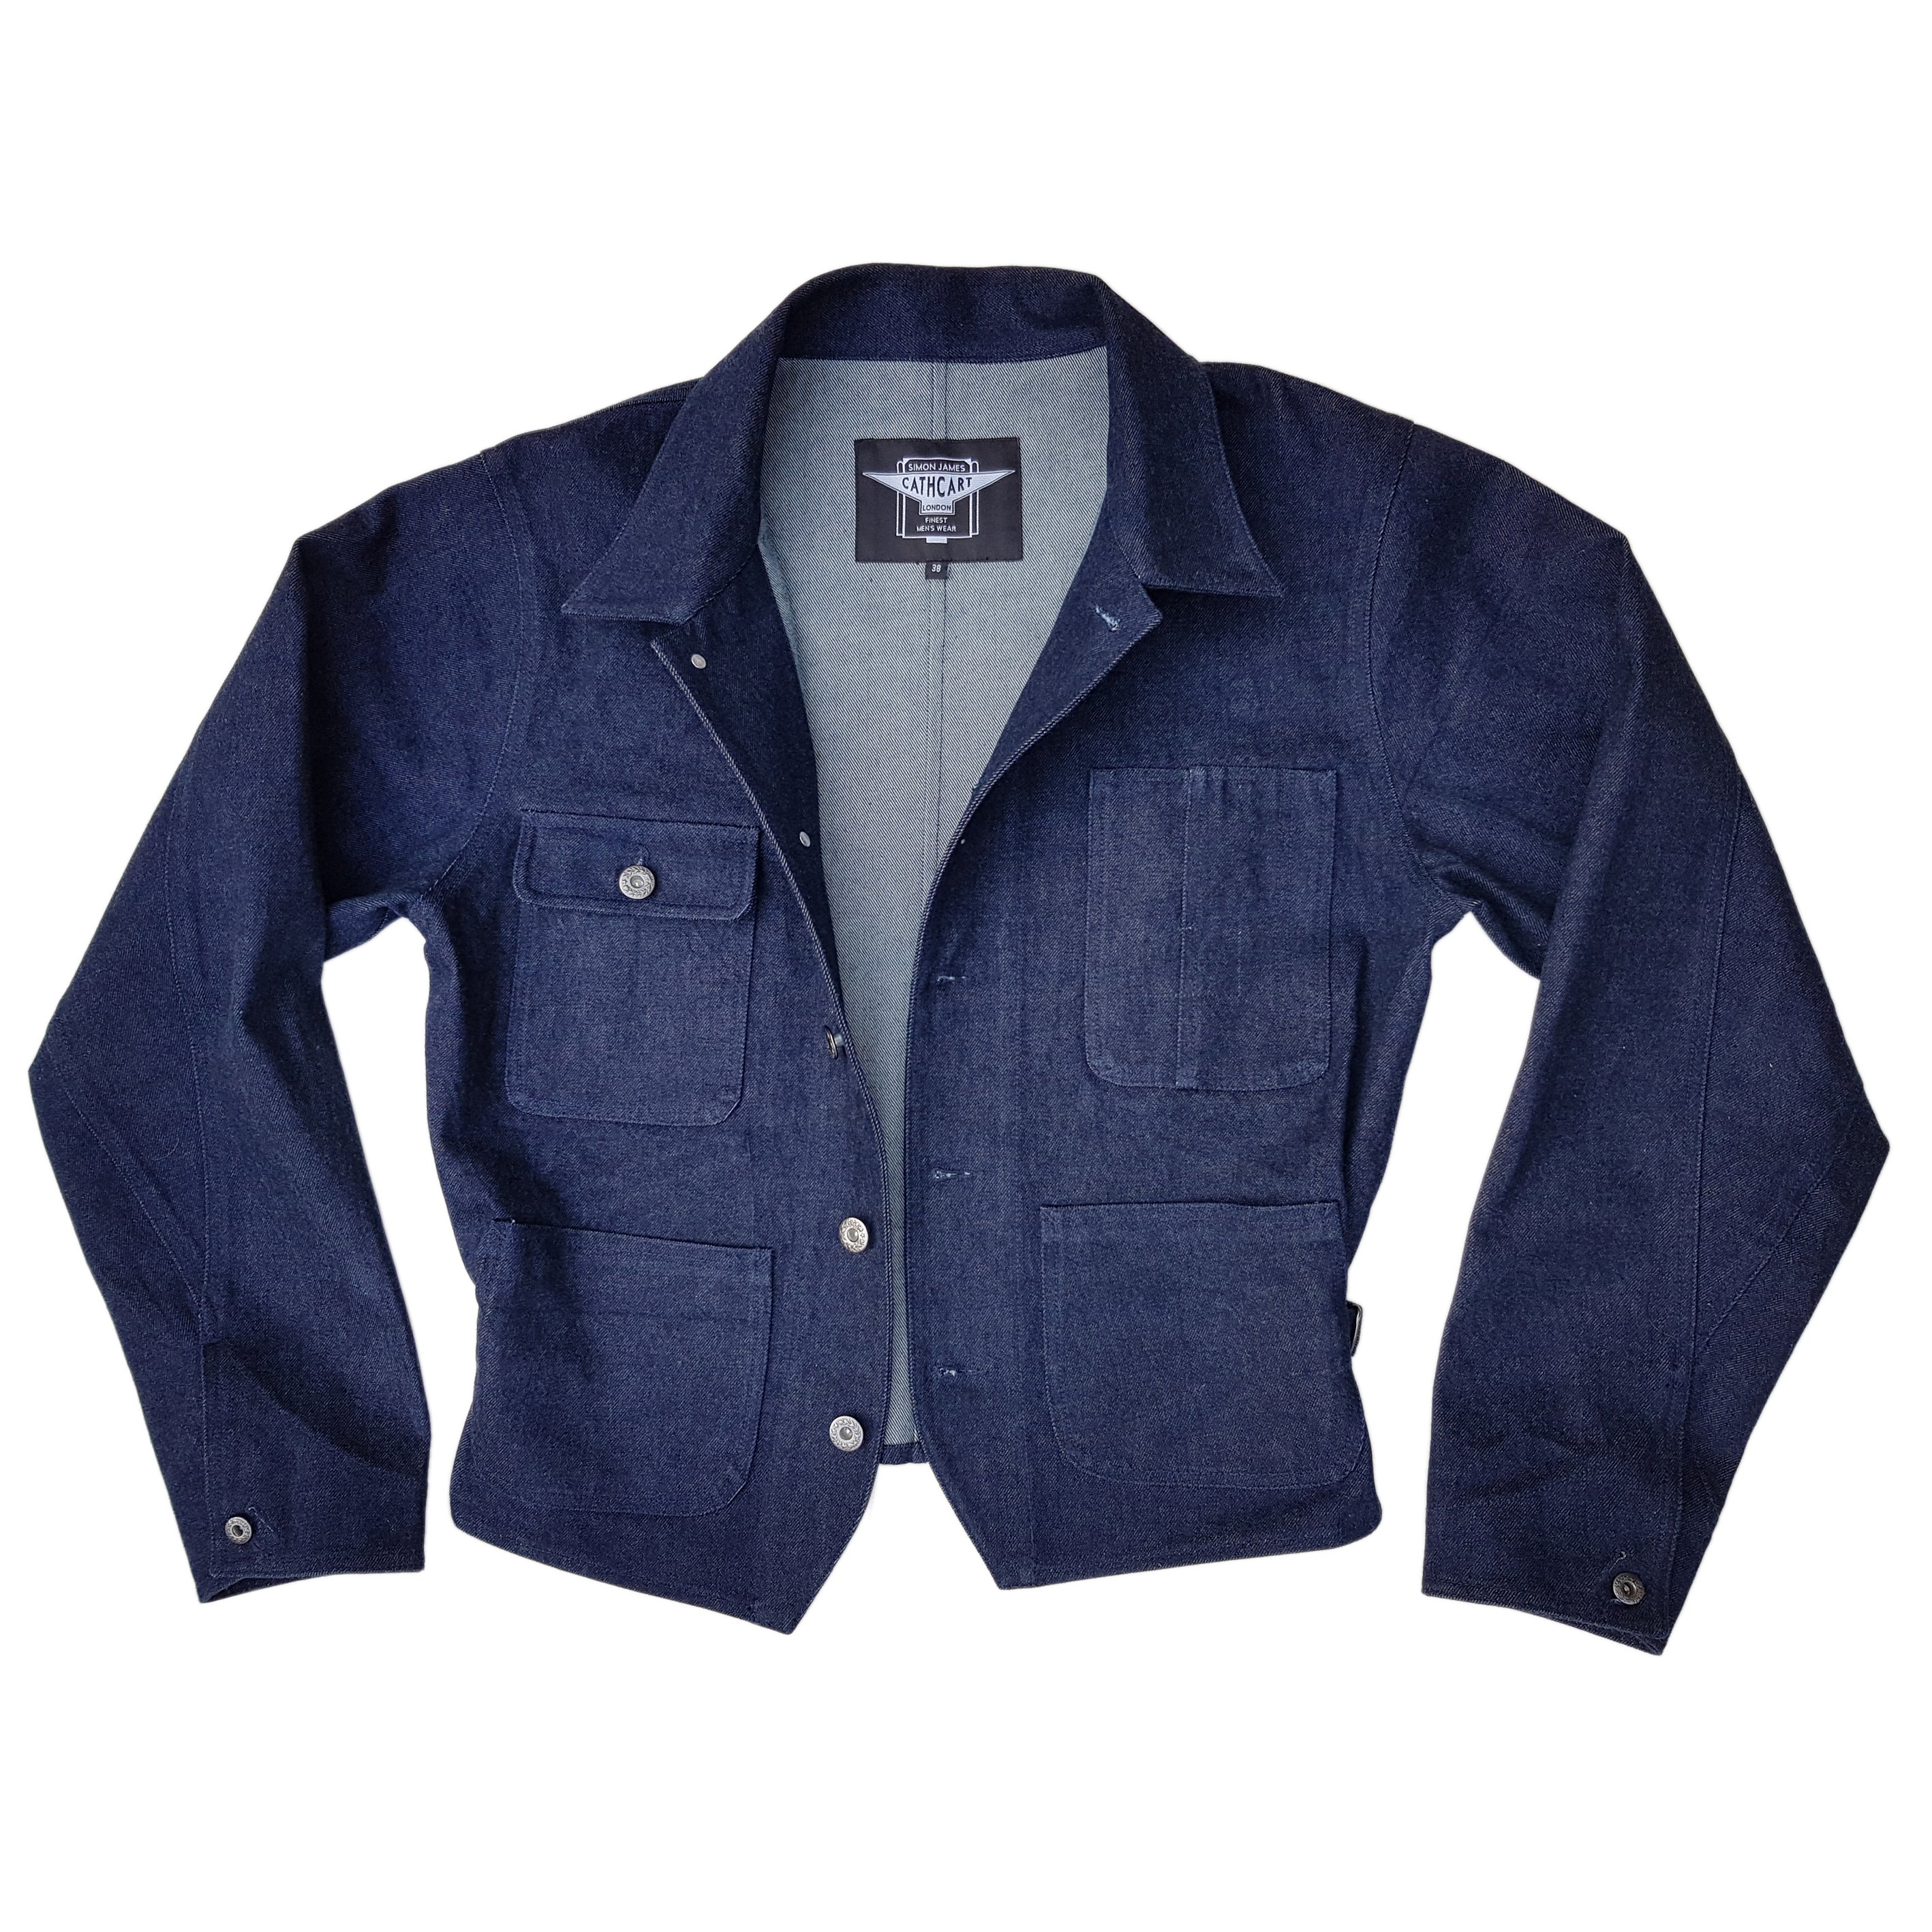 Denim Jackets - New or Vintage | Page 32 | The Fedora Lounge